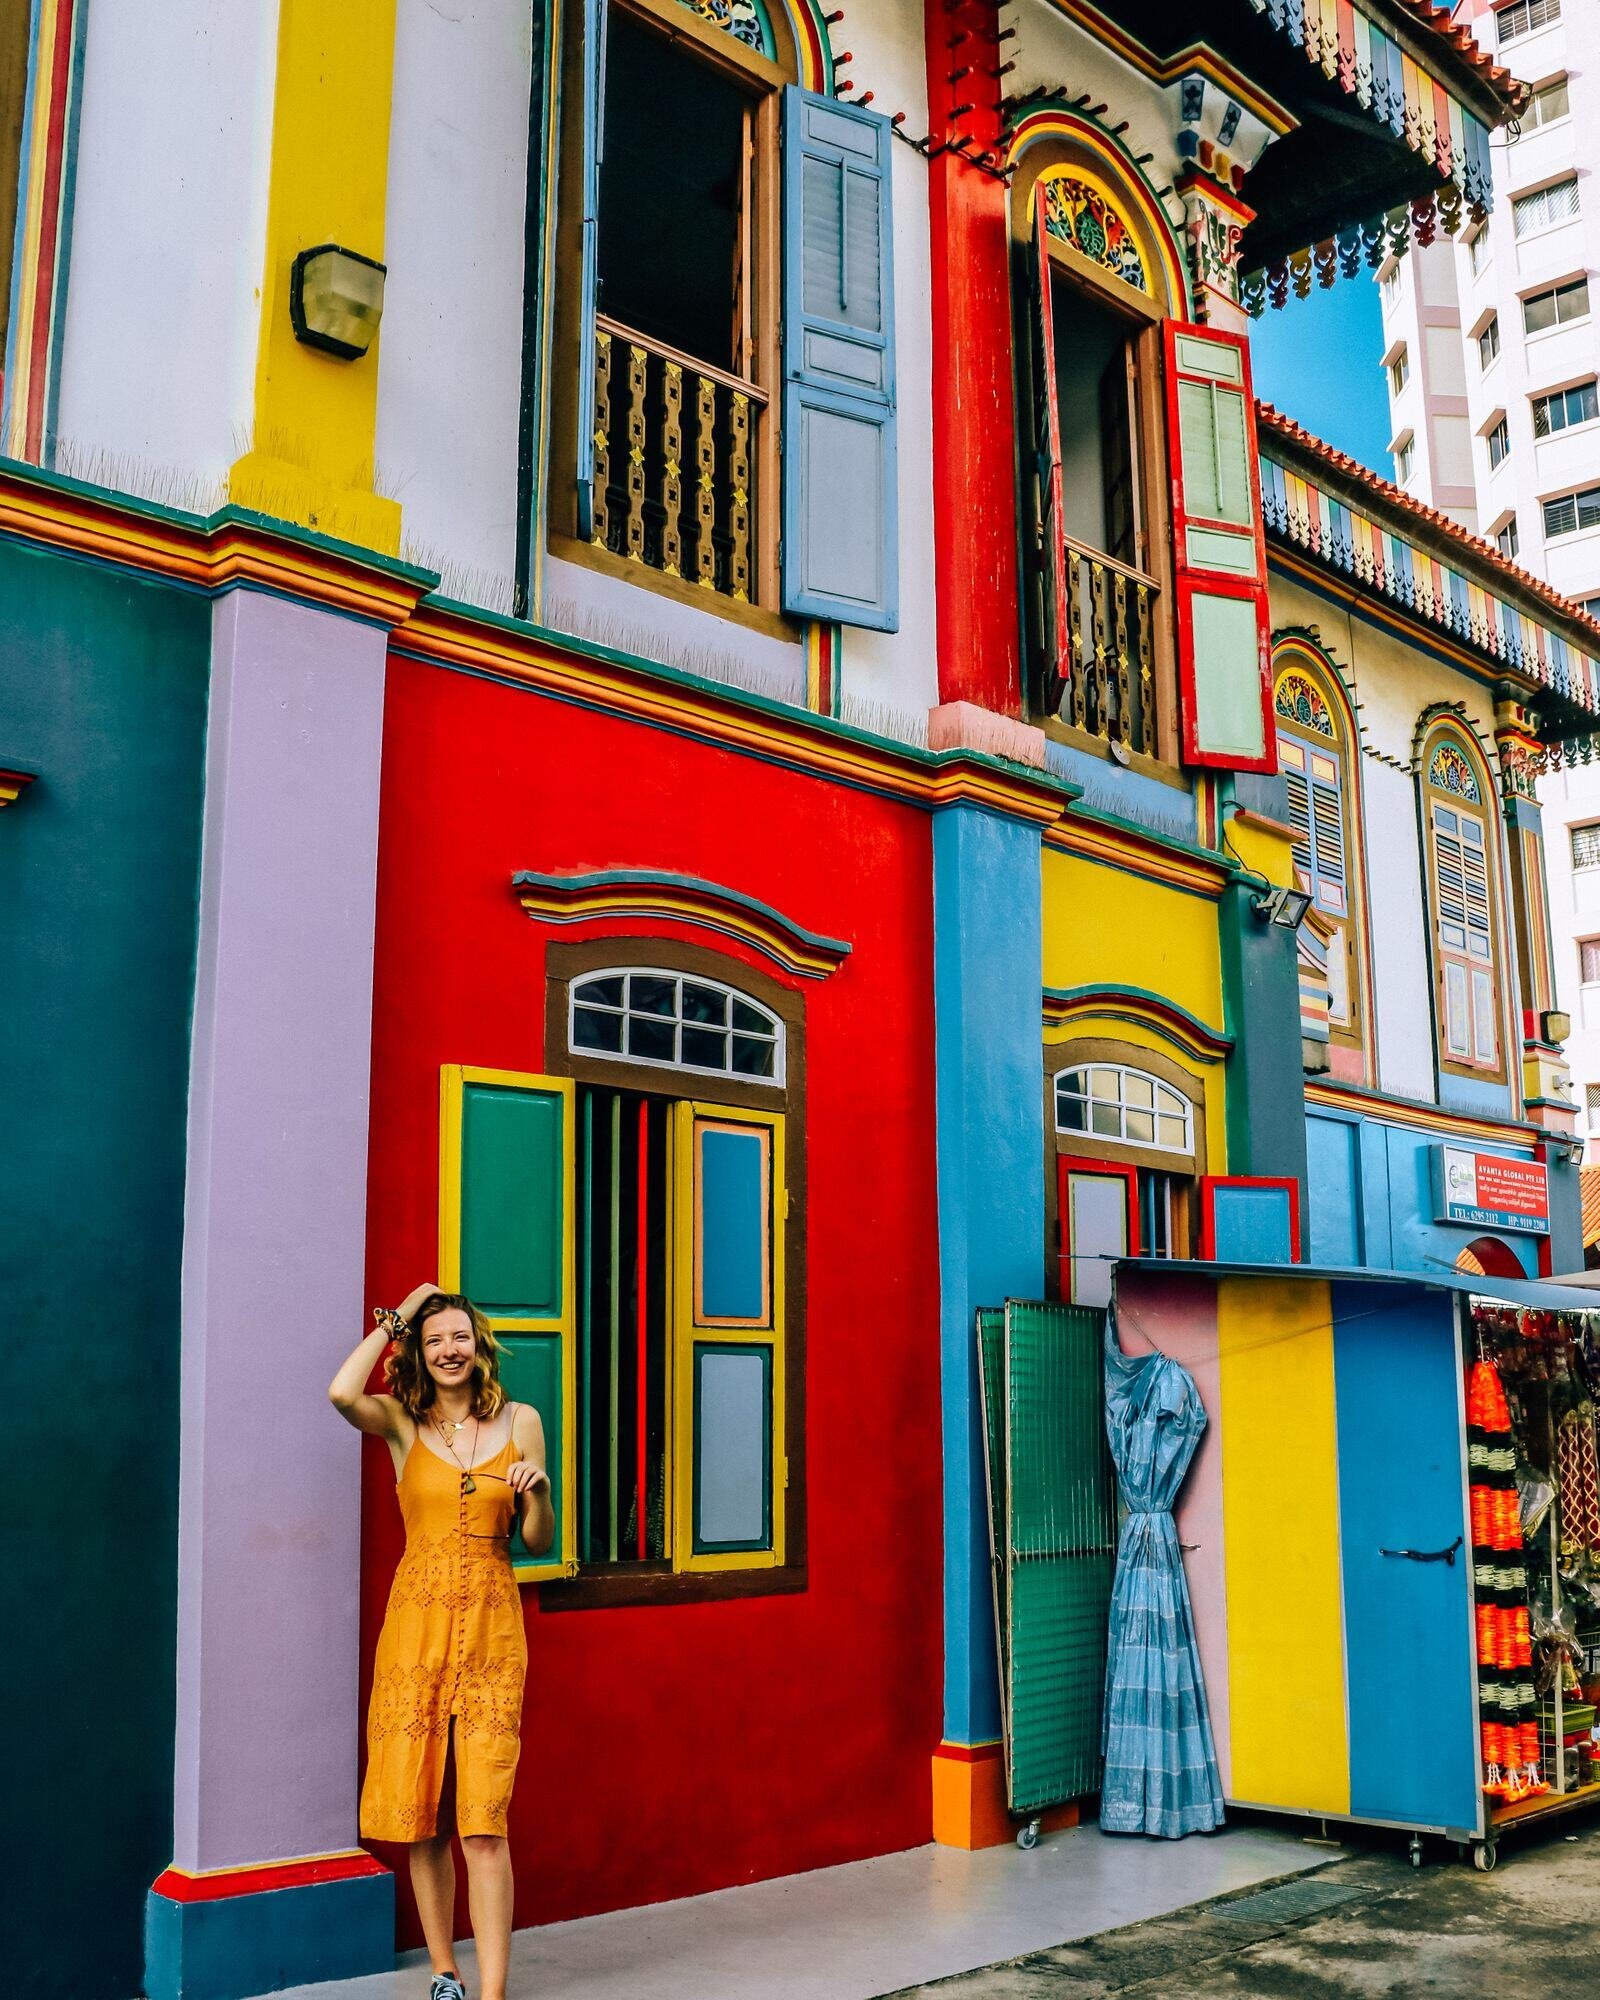 The most colourful photography locations in Singapore